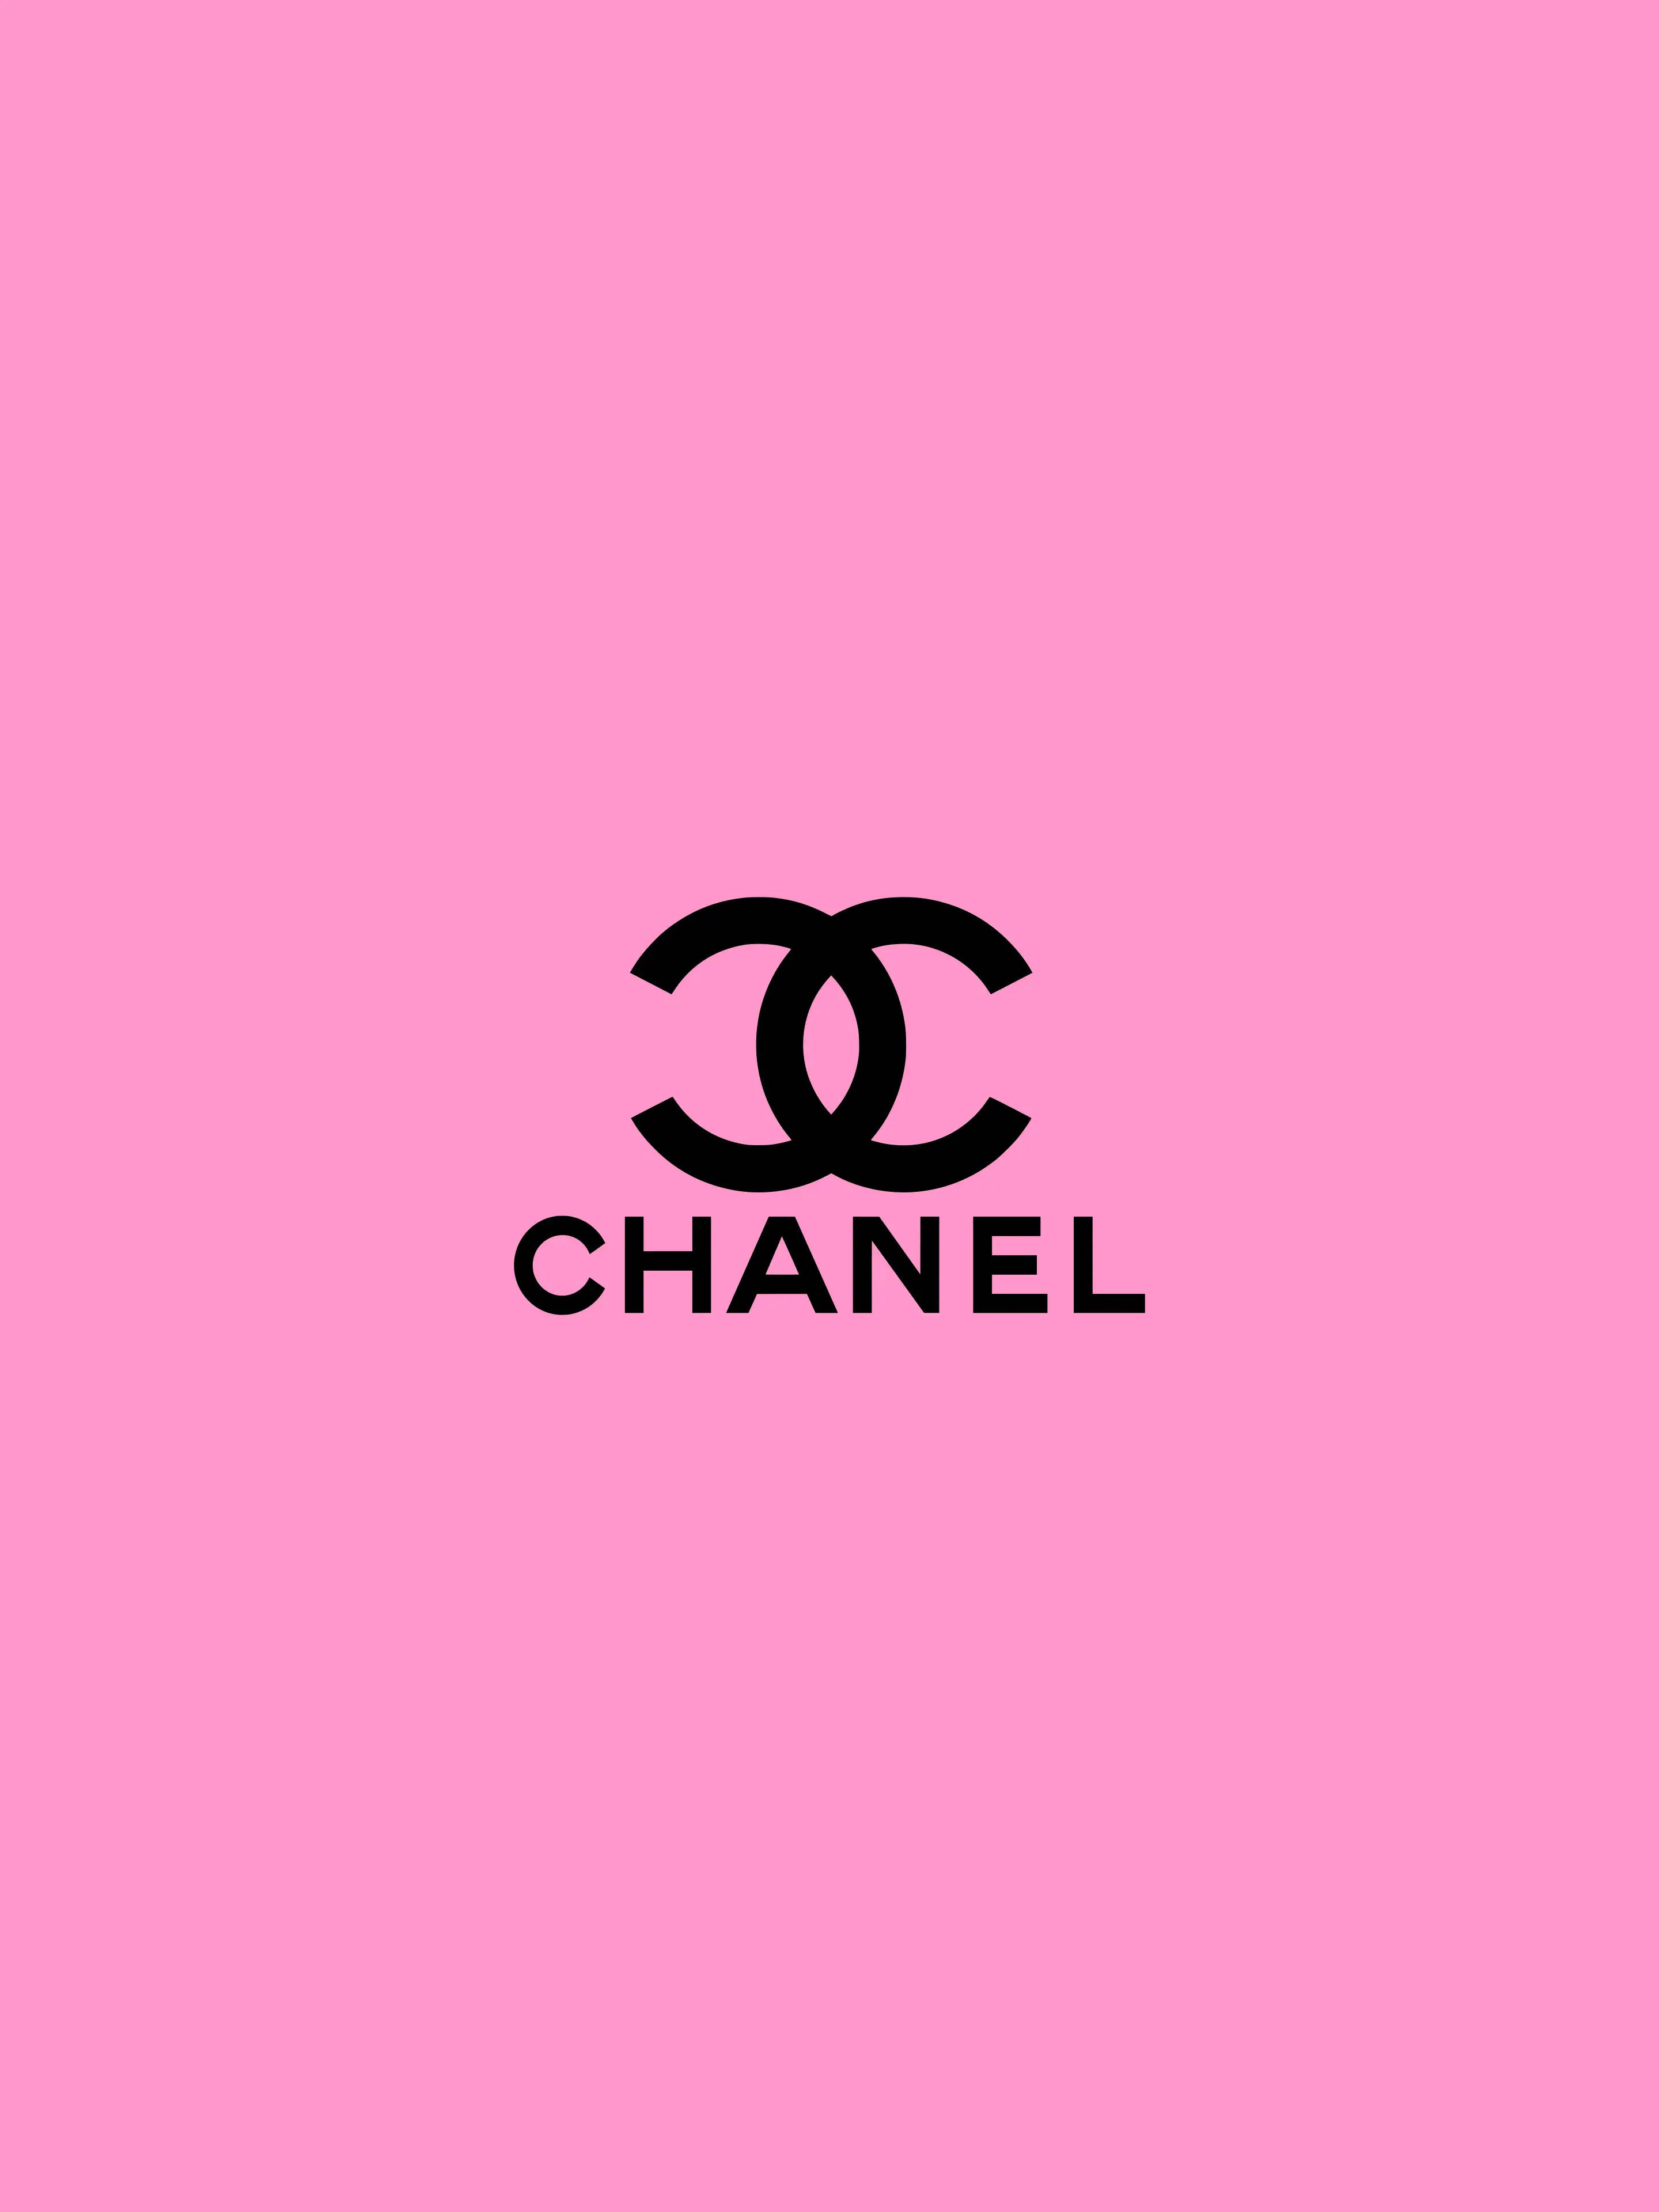 Download Lip Marks With Pink Chanel Logo Wallpaper | Wallpapers.com